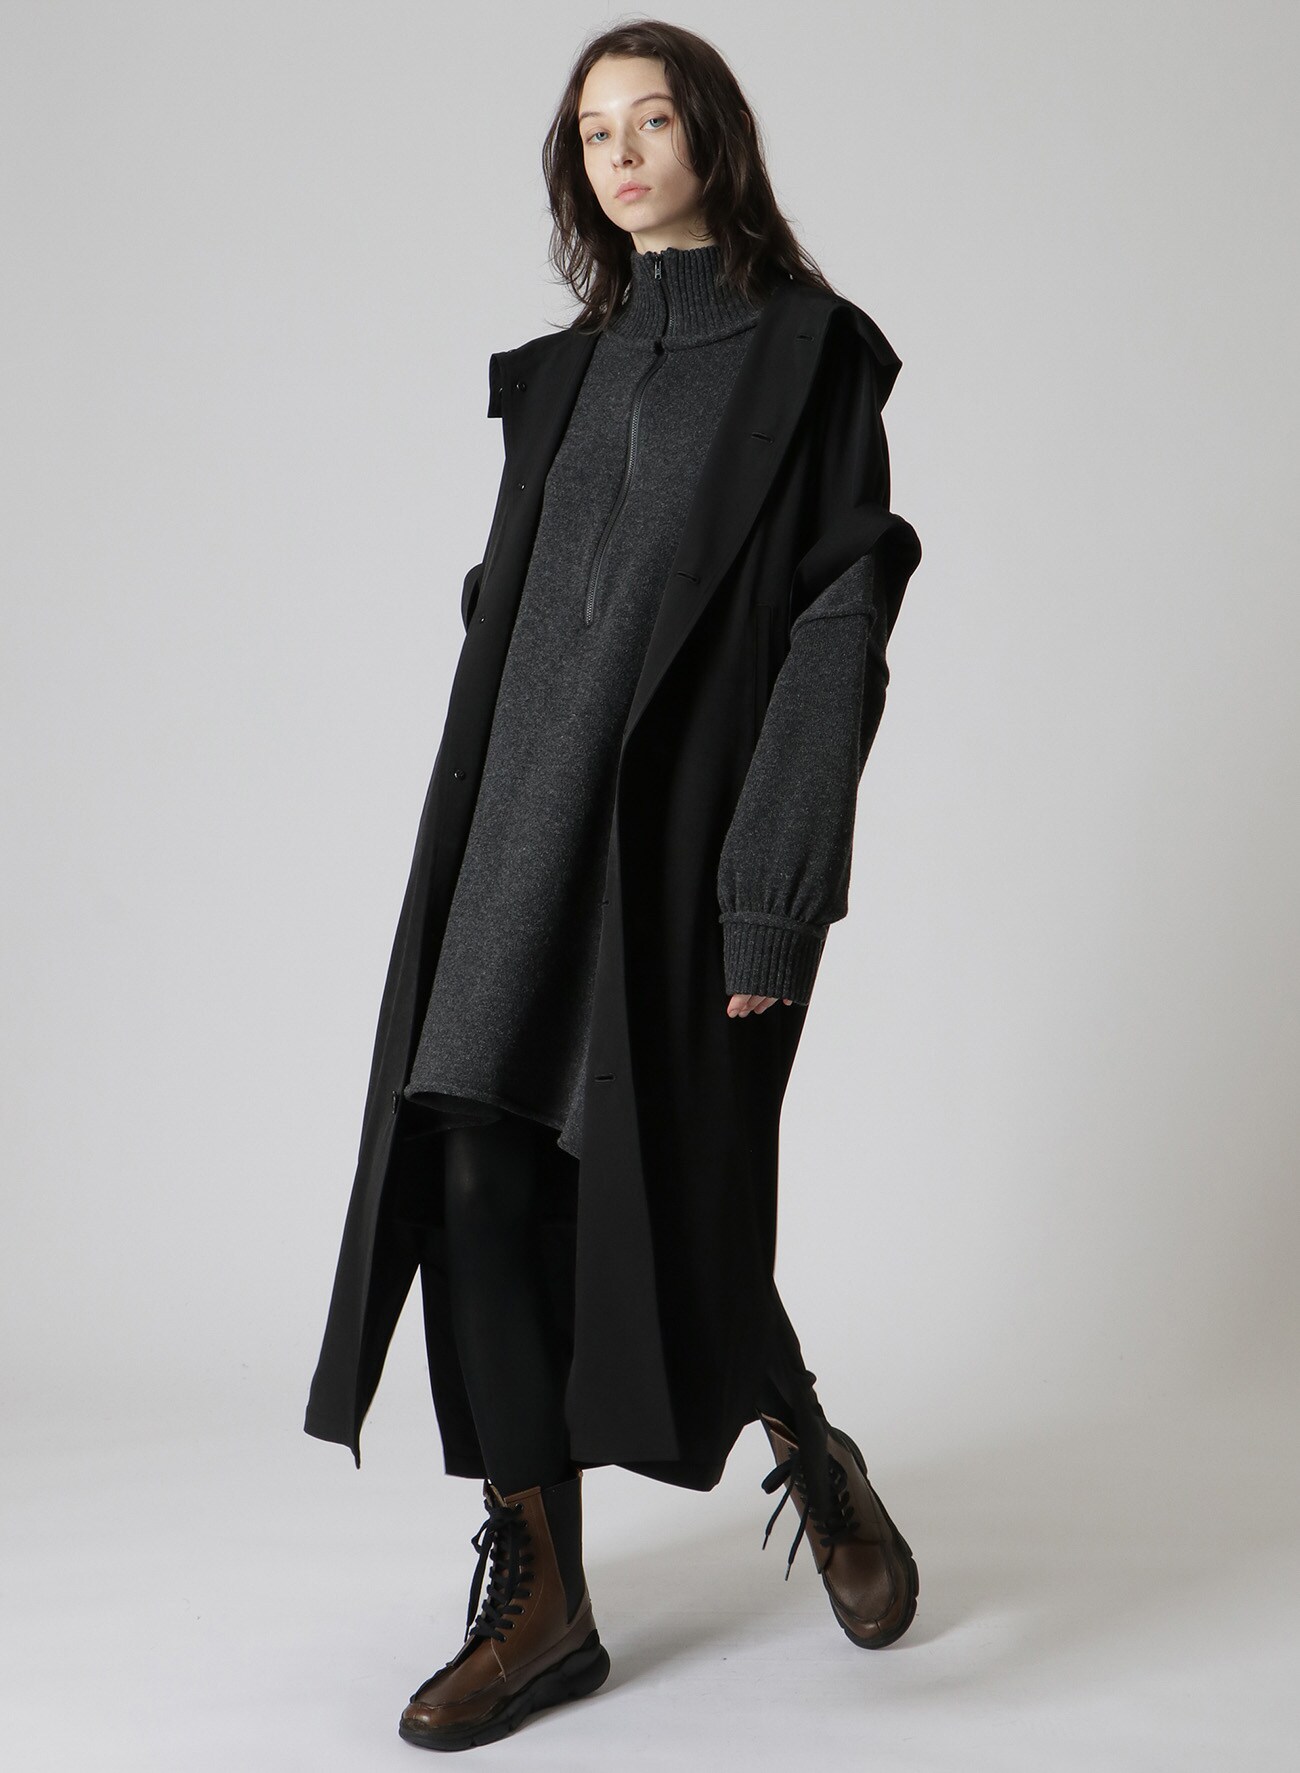 TRIACETATE POLYESTER de CHINE FRENCH SLEEVE HOODED DRESS